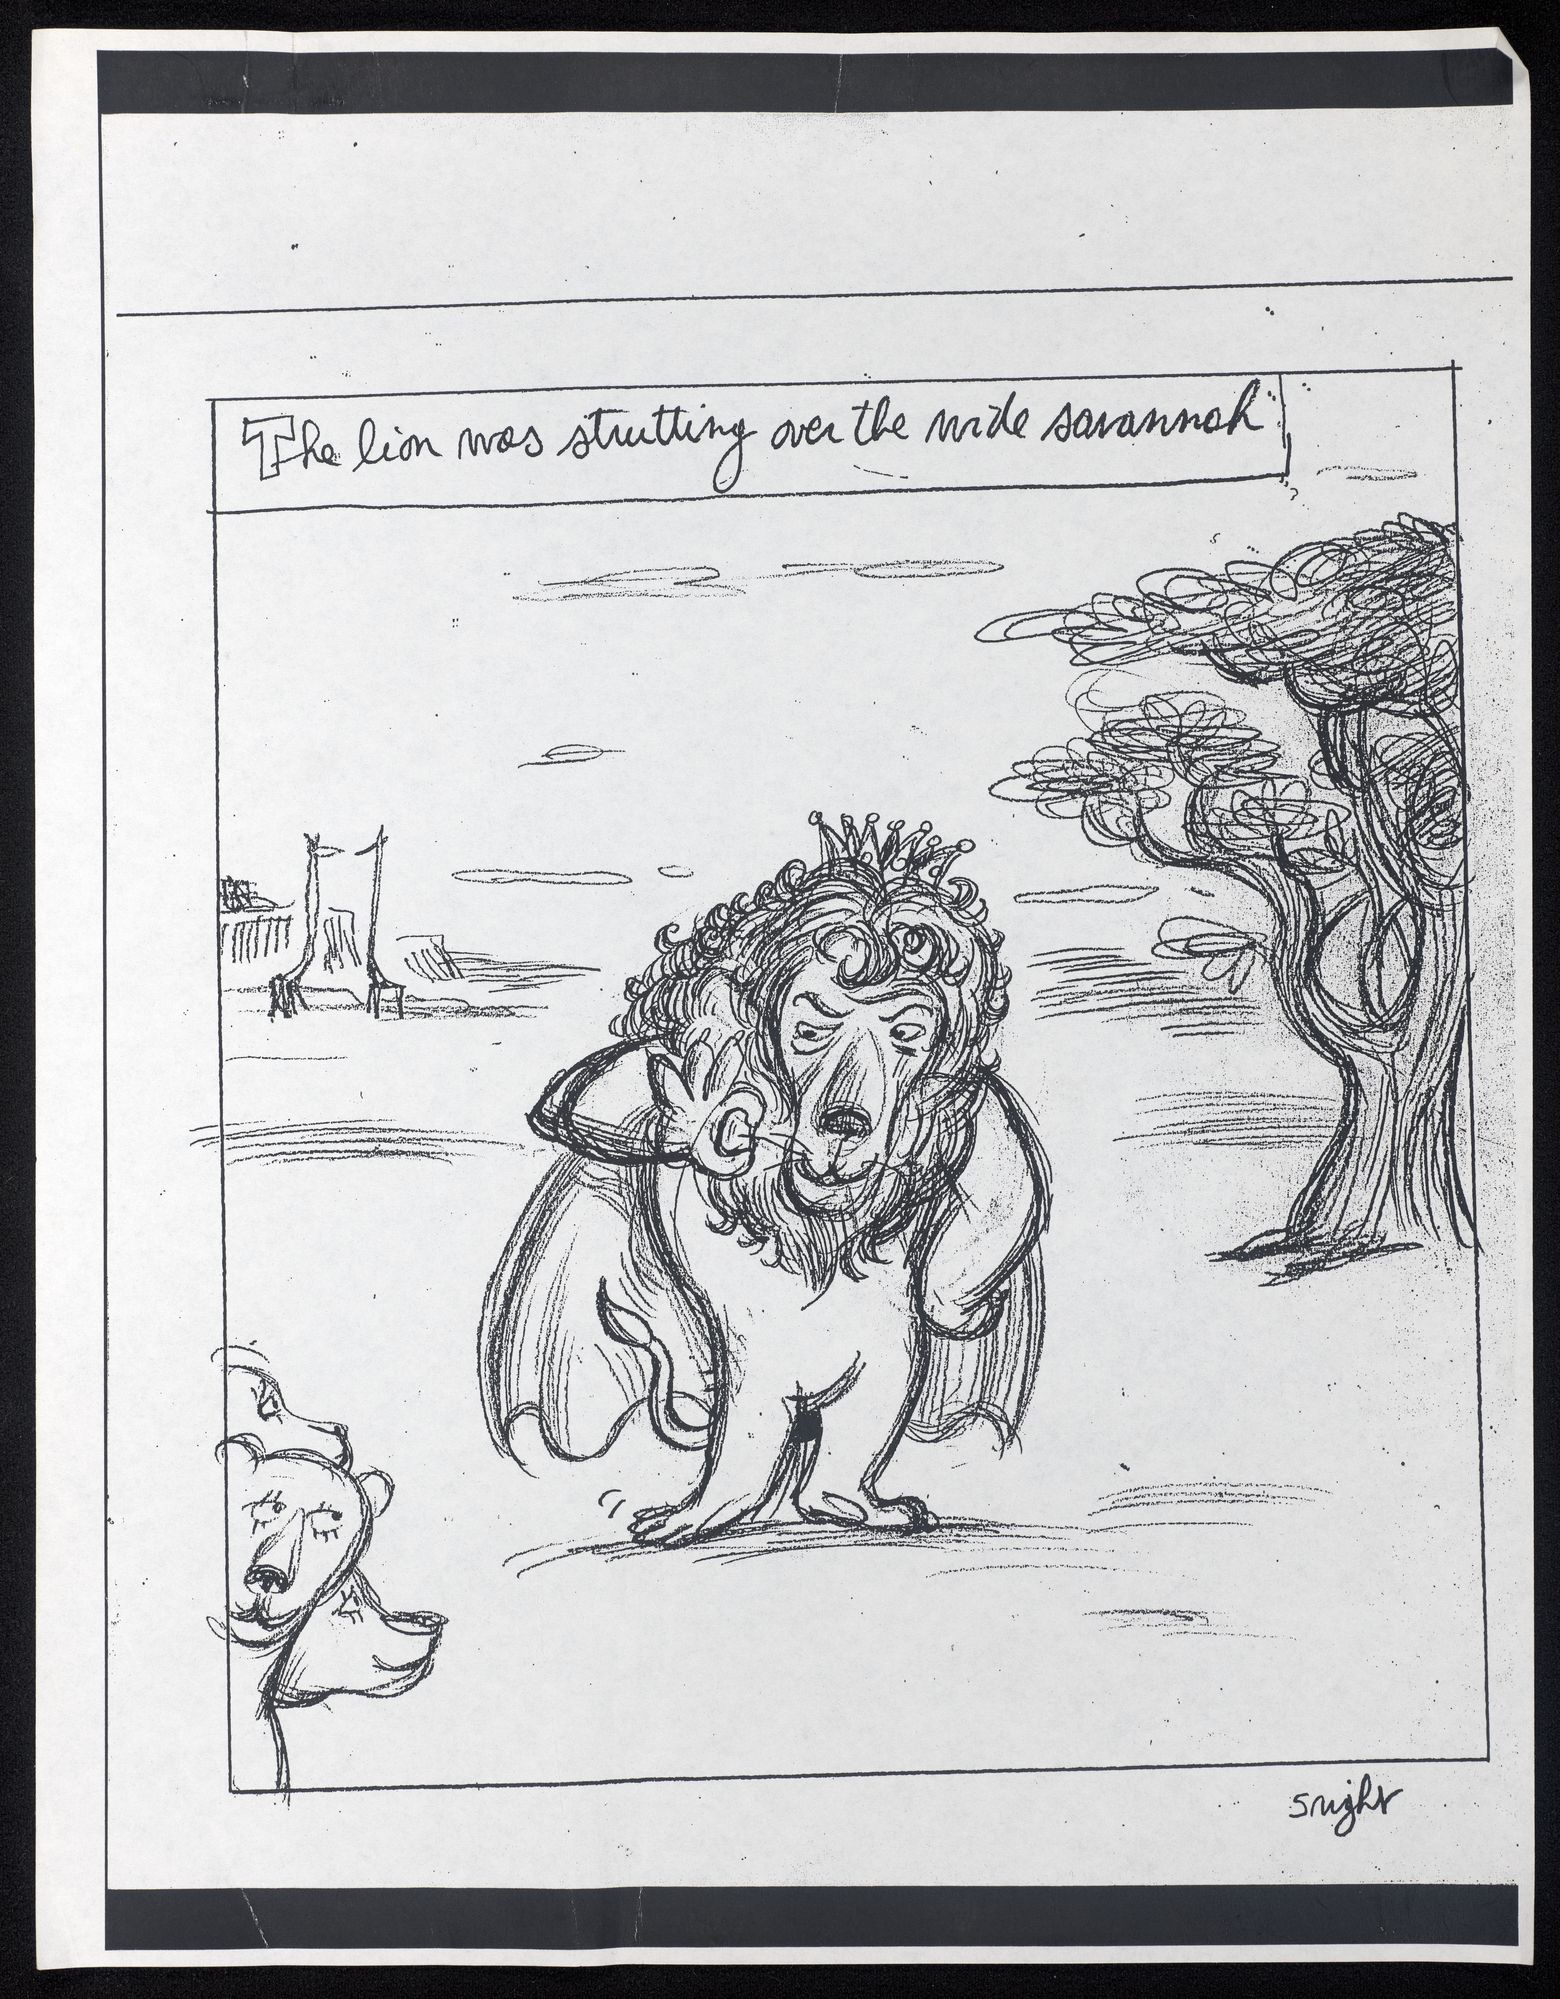 Who's Got Game: The Lion or the Mouse; Toni Morrison Papers, C1491, Manuscripts Division, Department of Special Collections, Princeton University Library